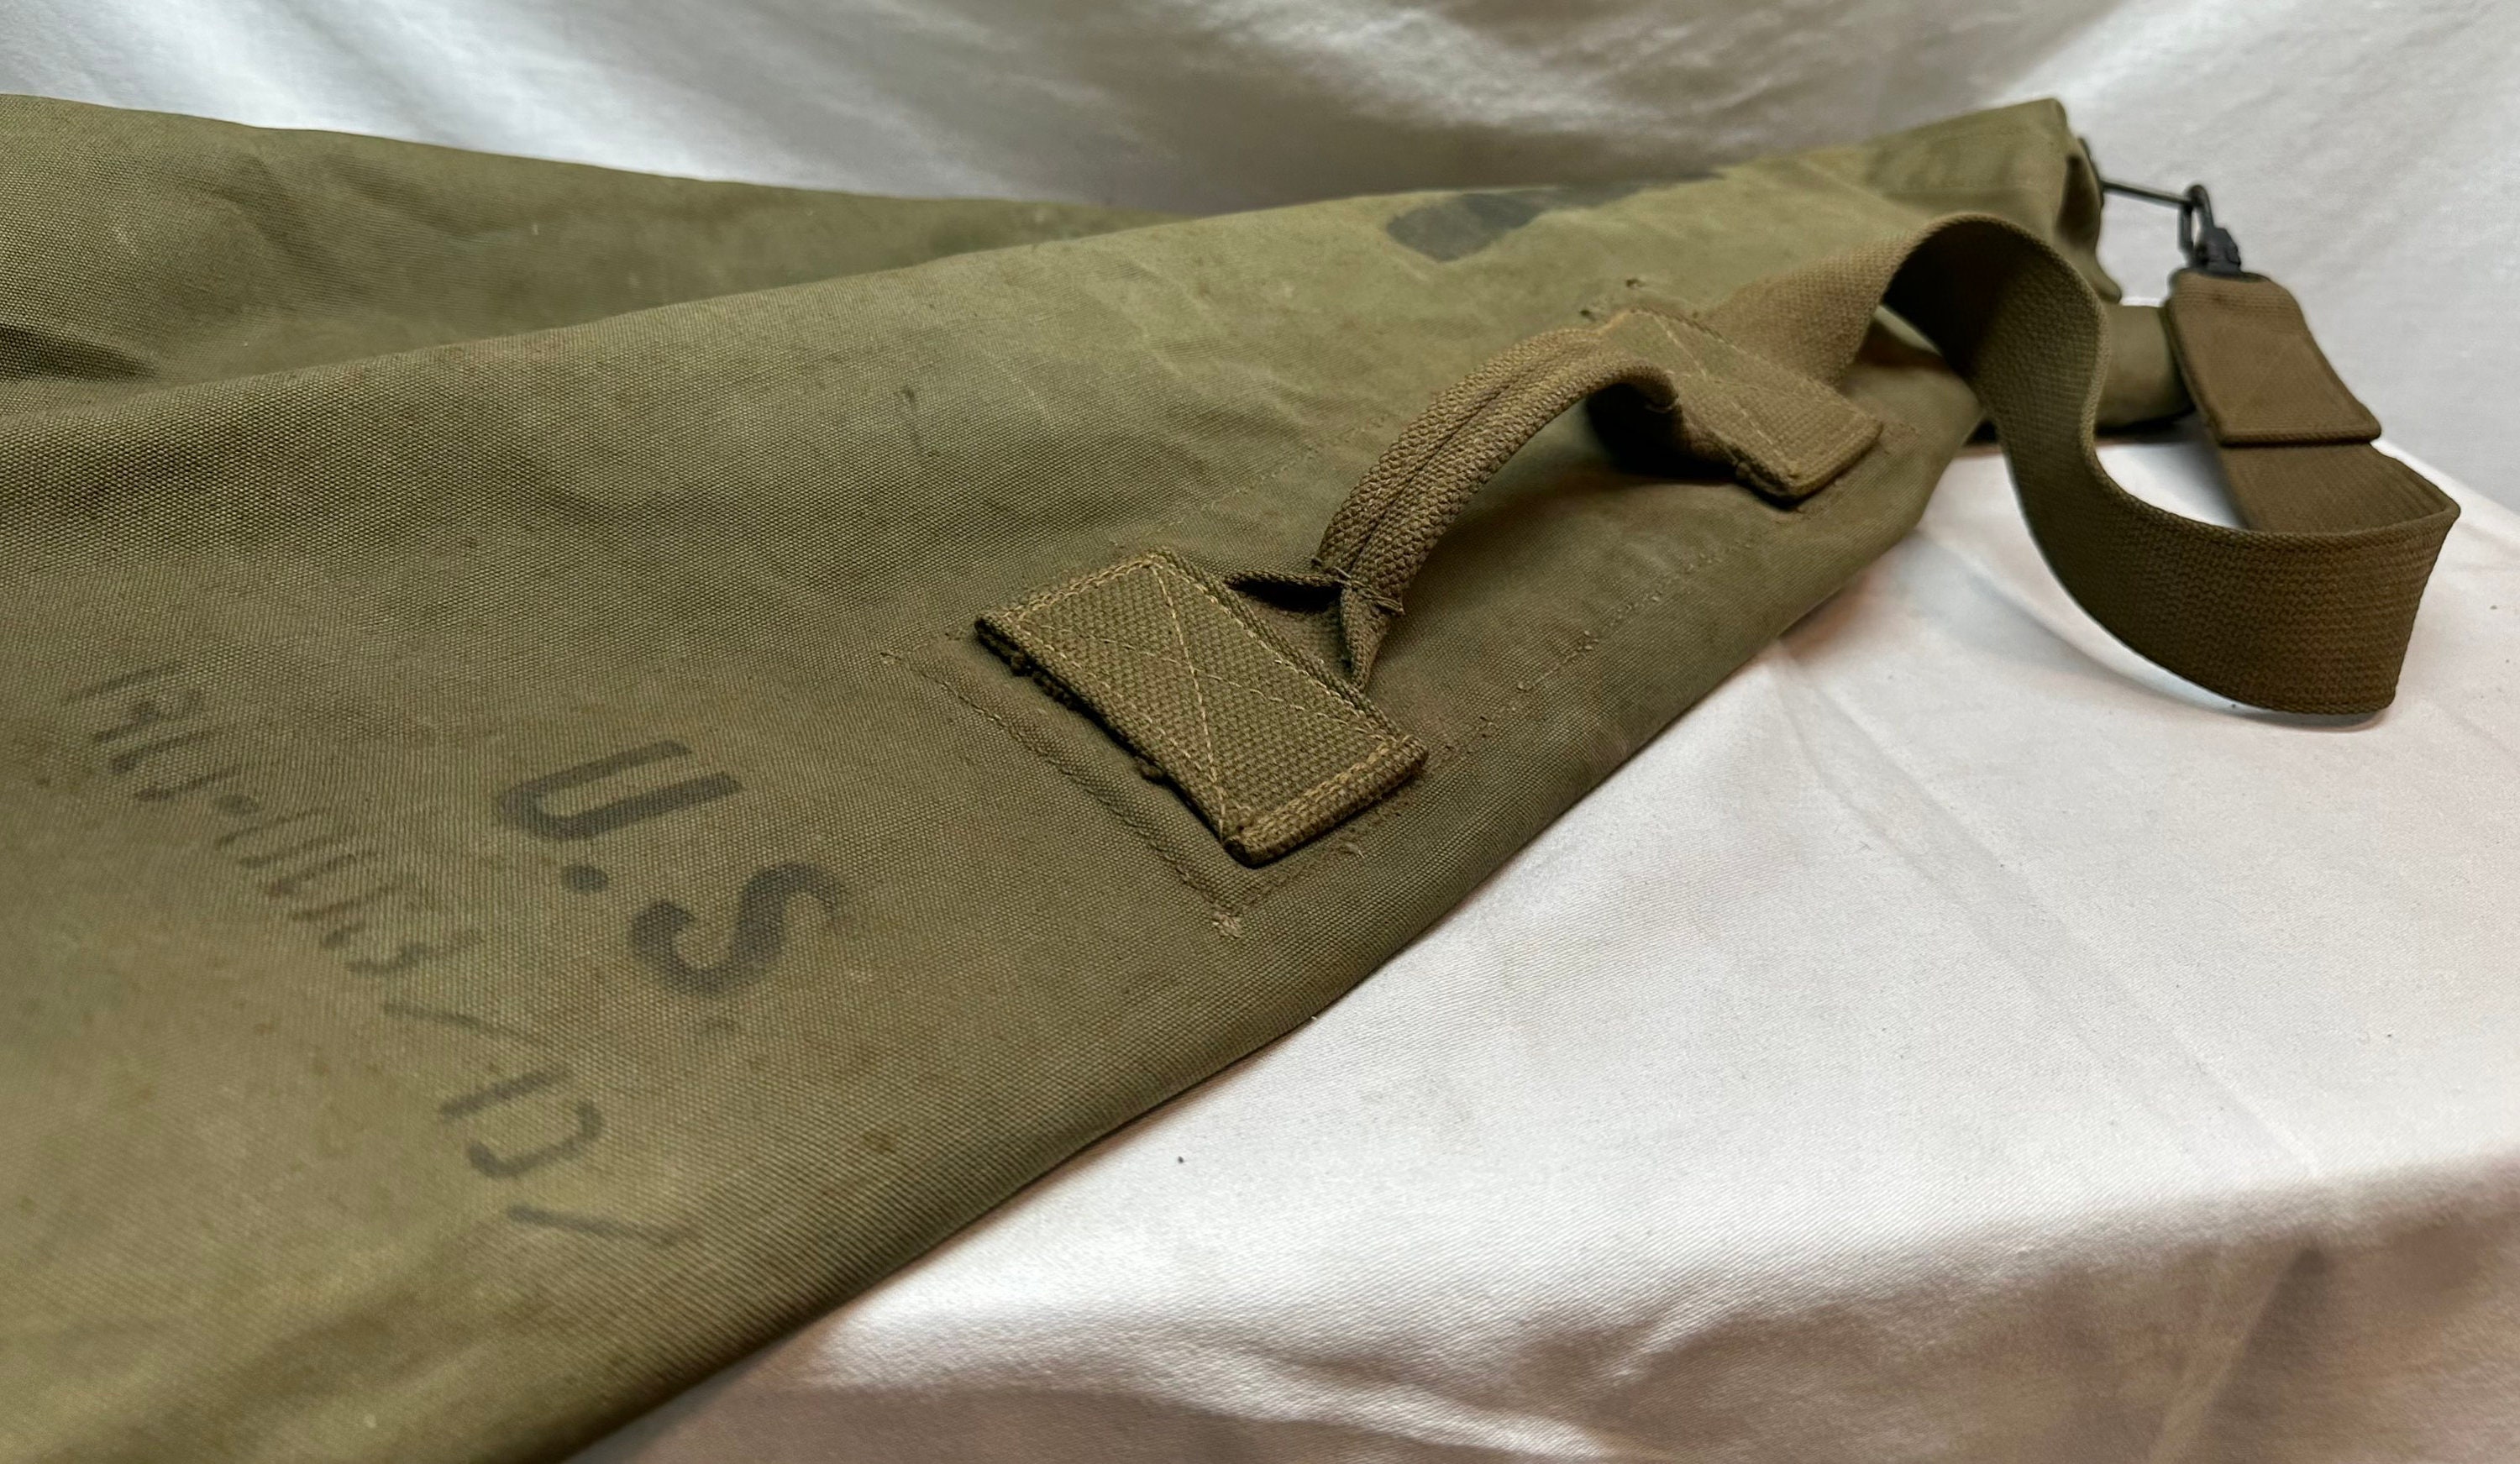 Buy Olive Top Load Canvas Duffel Bags at Army Surplus World